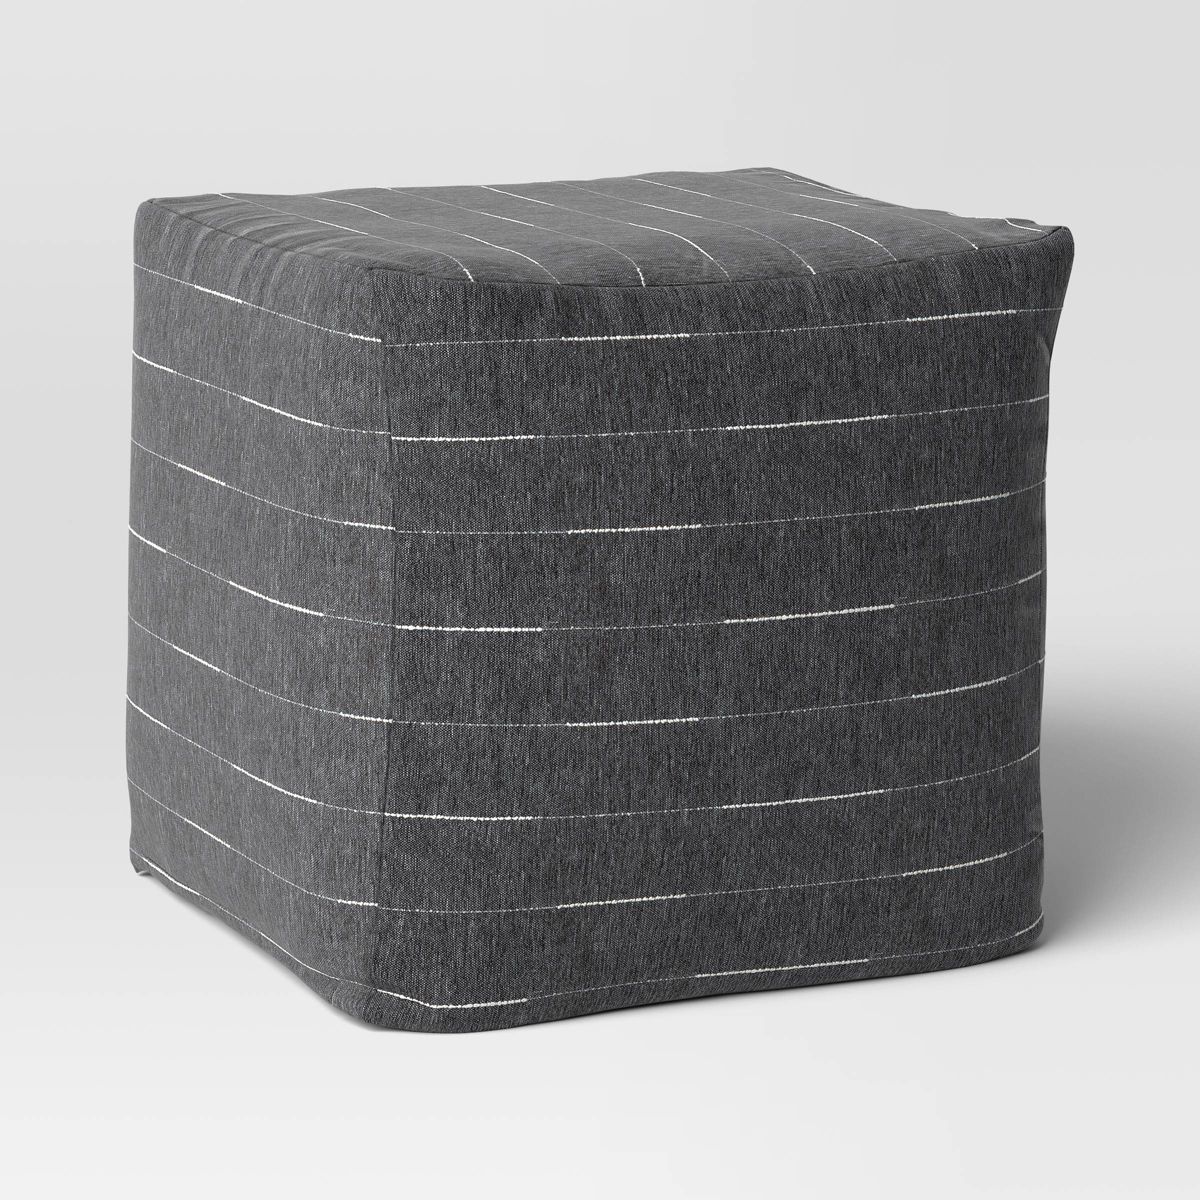 18"x18" Outdoor Patio Pouf - Threshold™ | Target